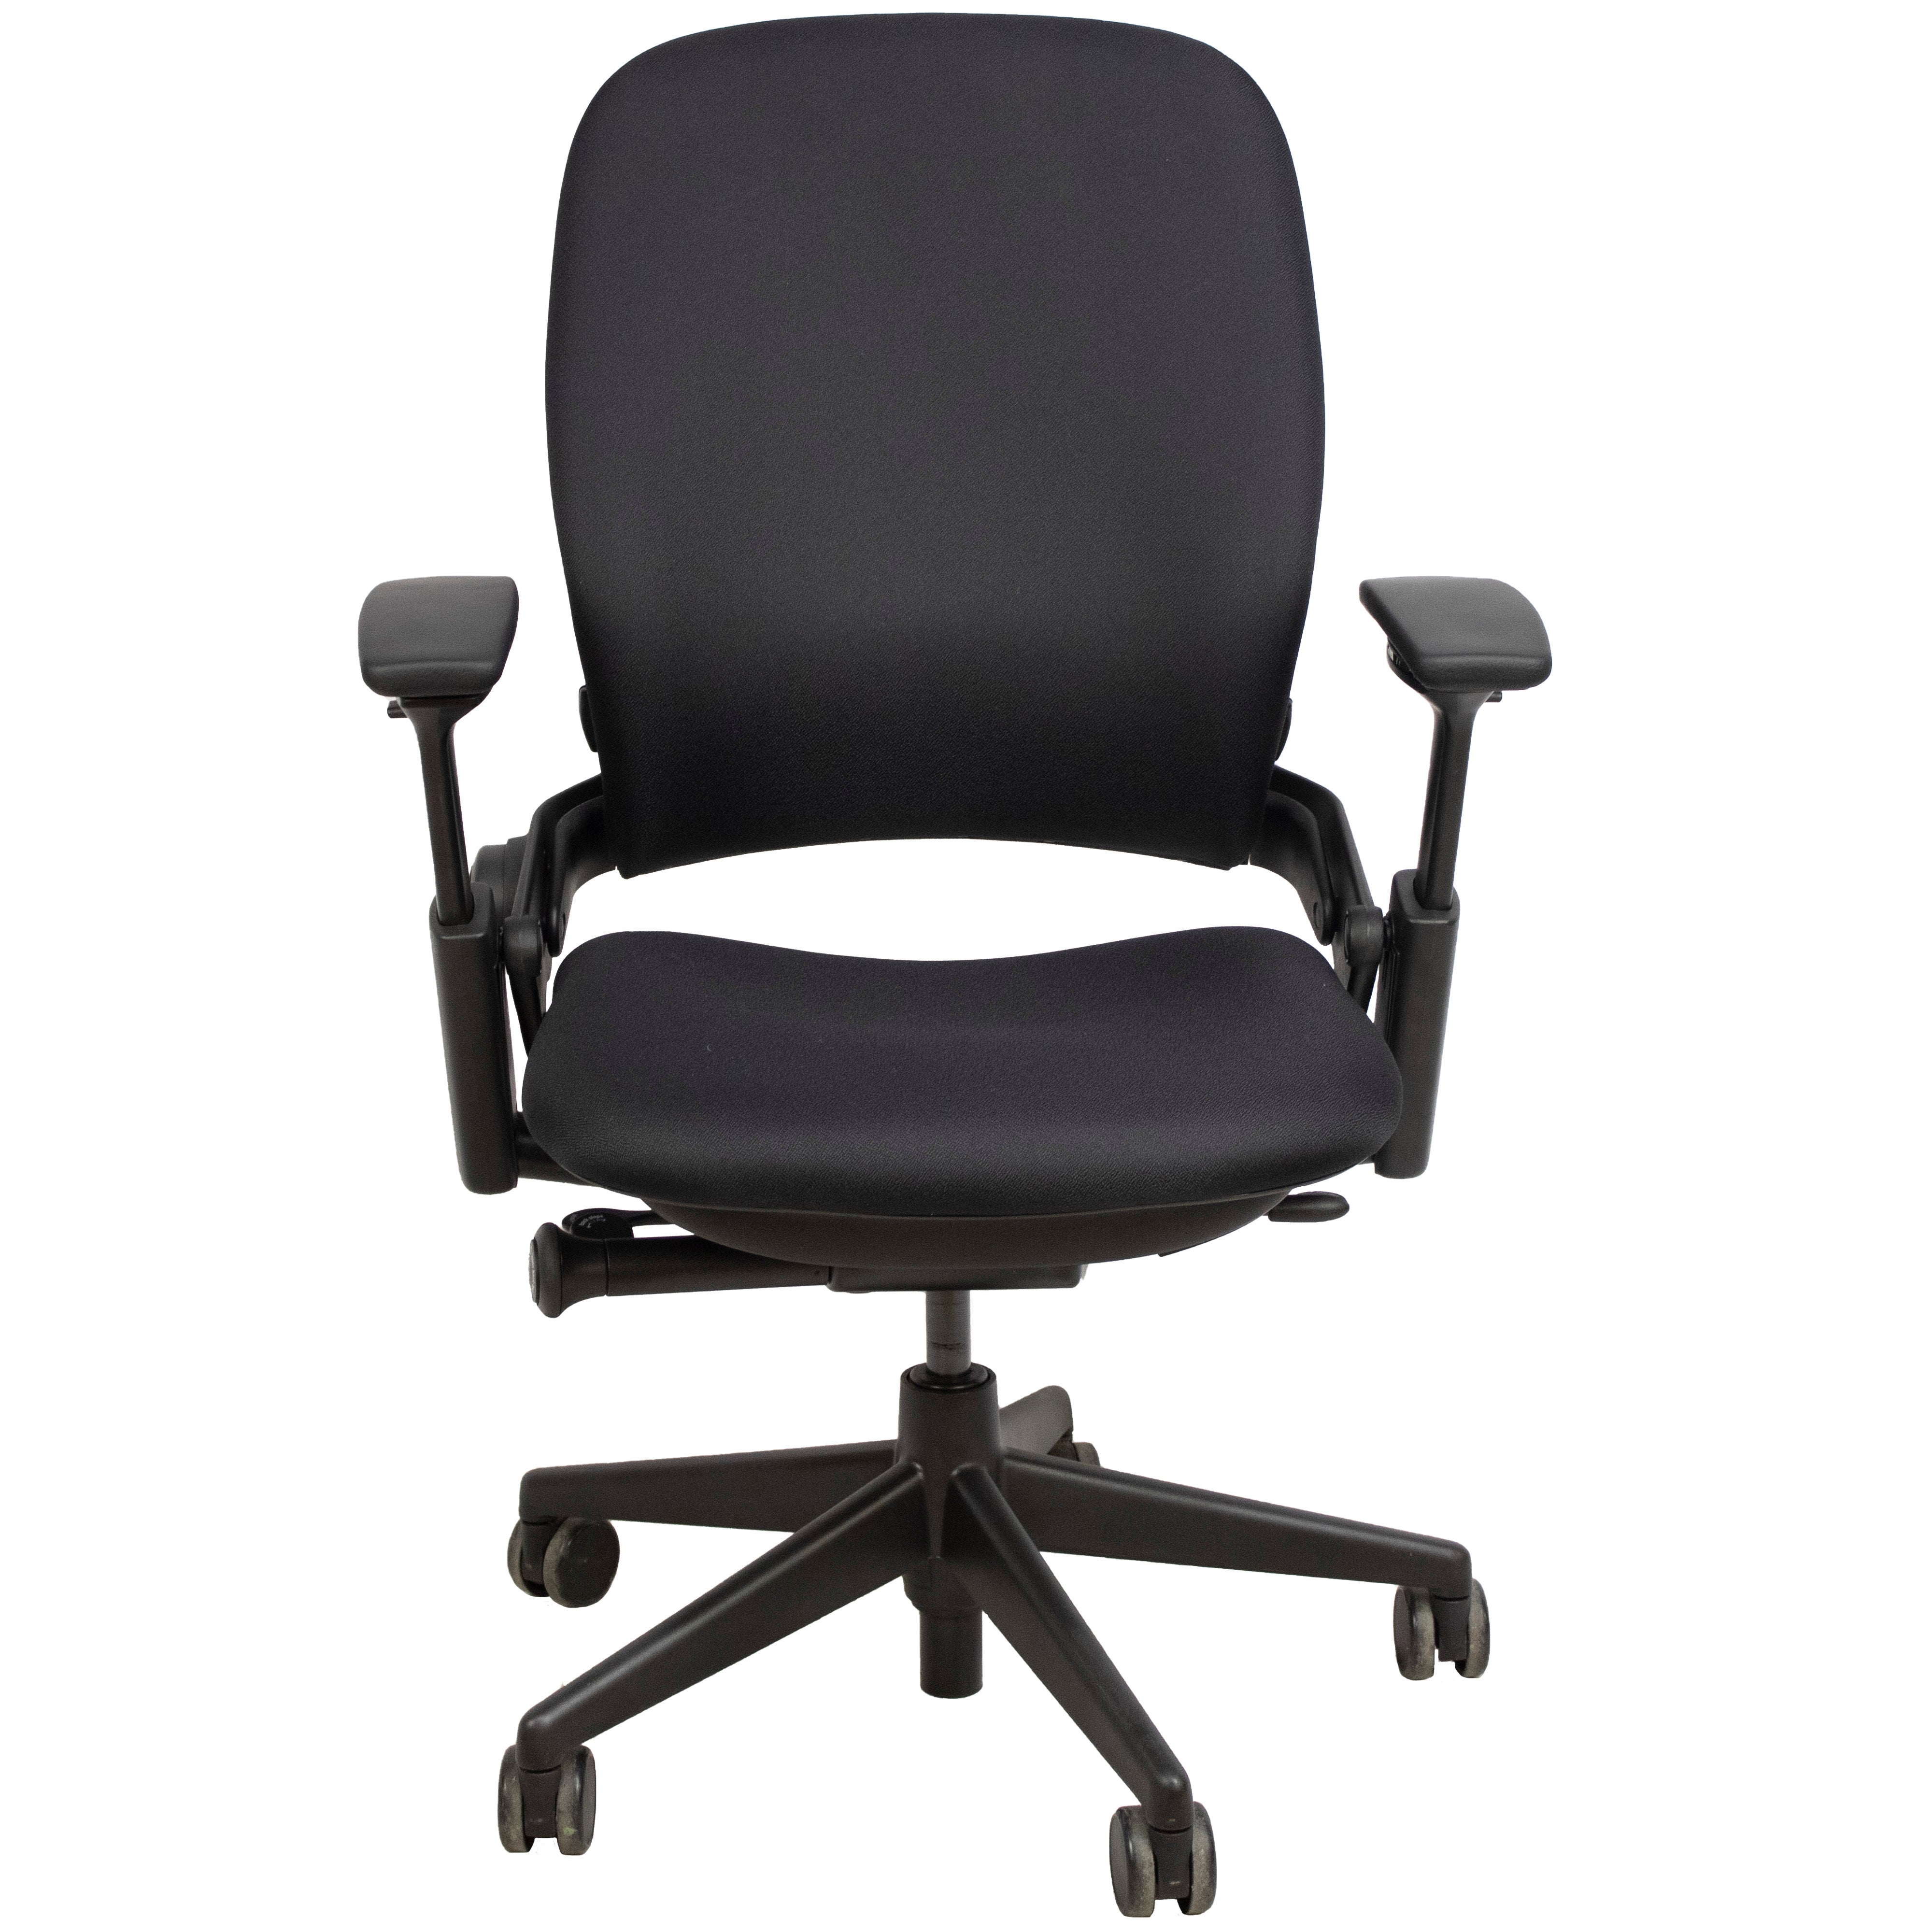 Steelcase Leap V2, Black - Preowned